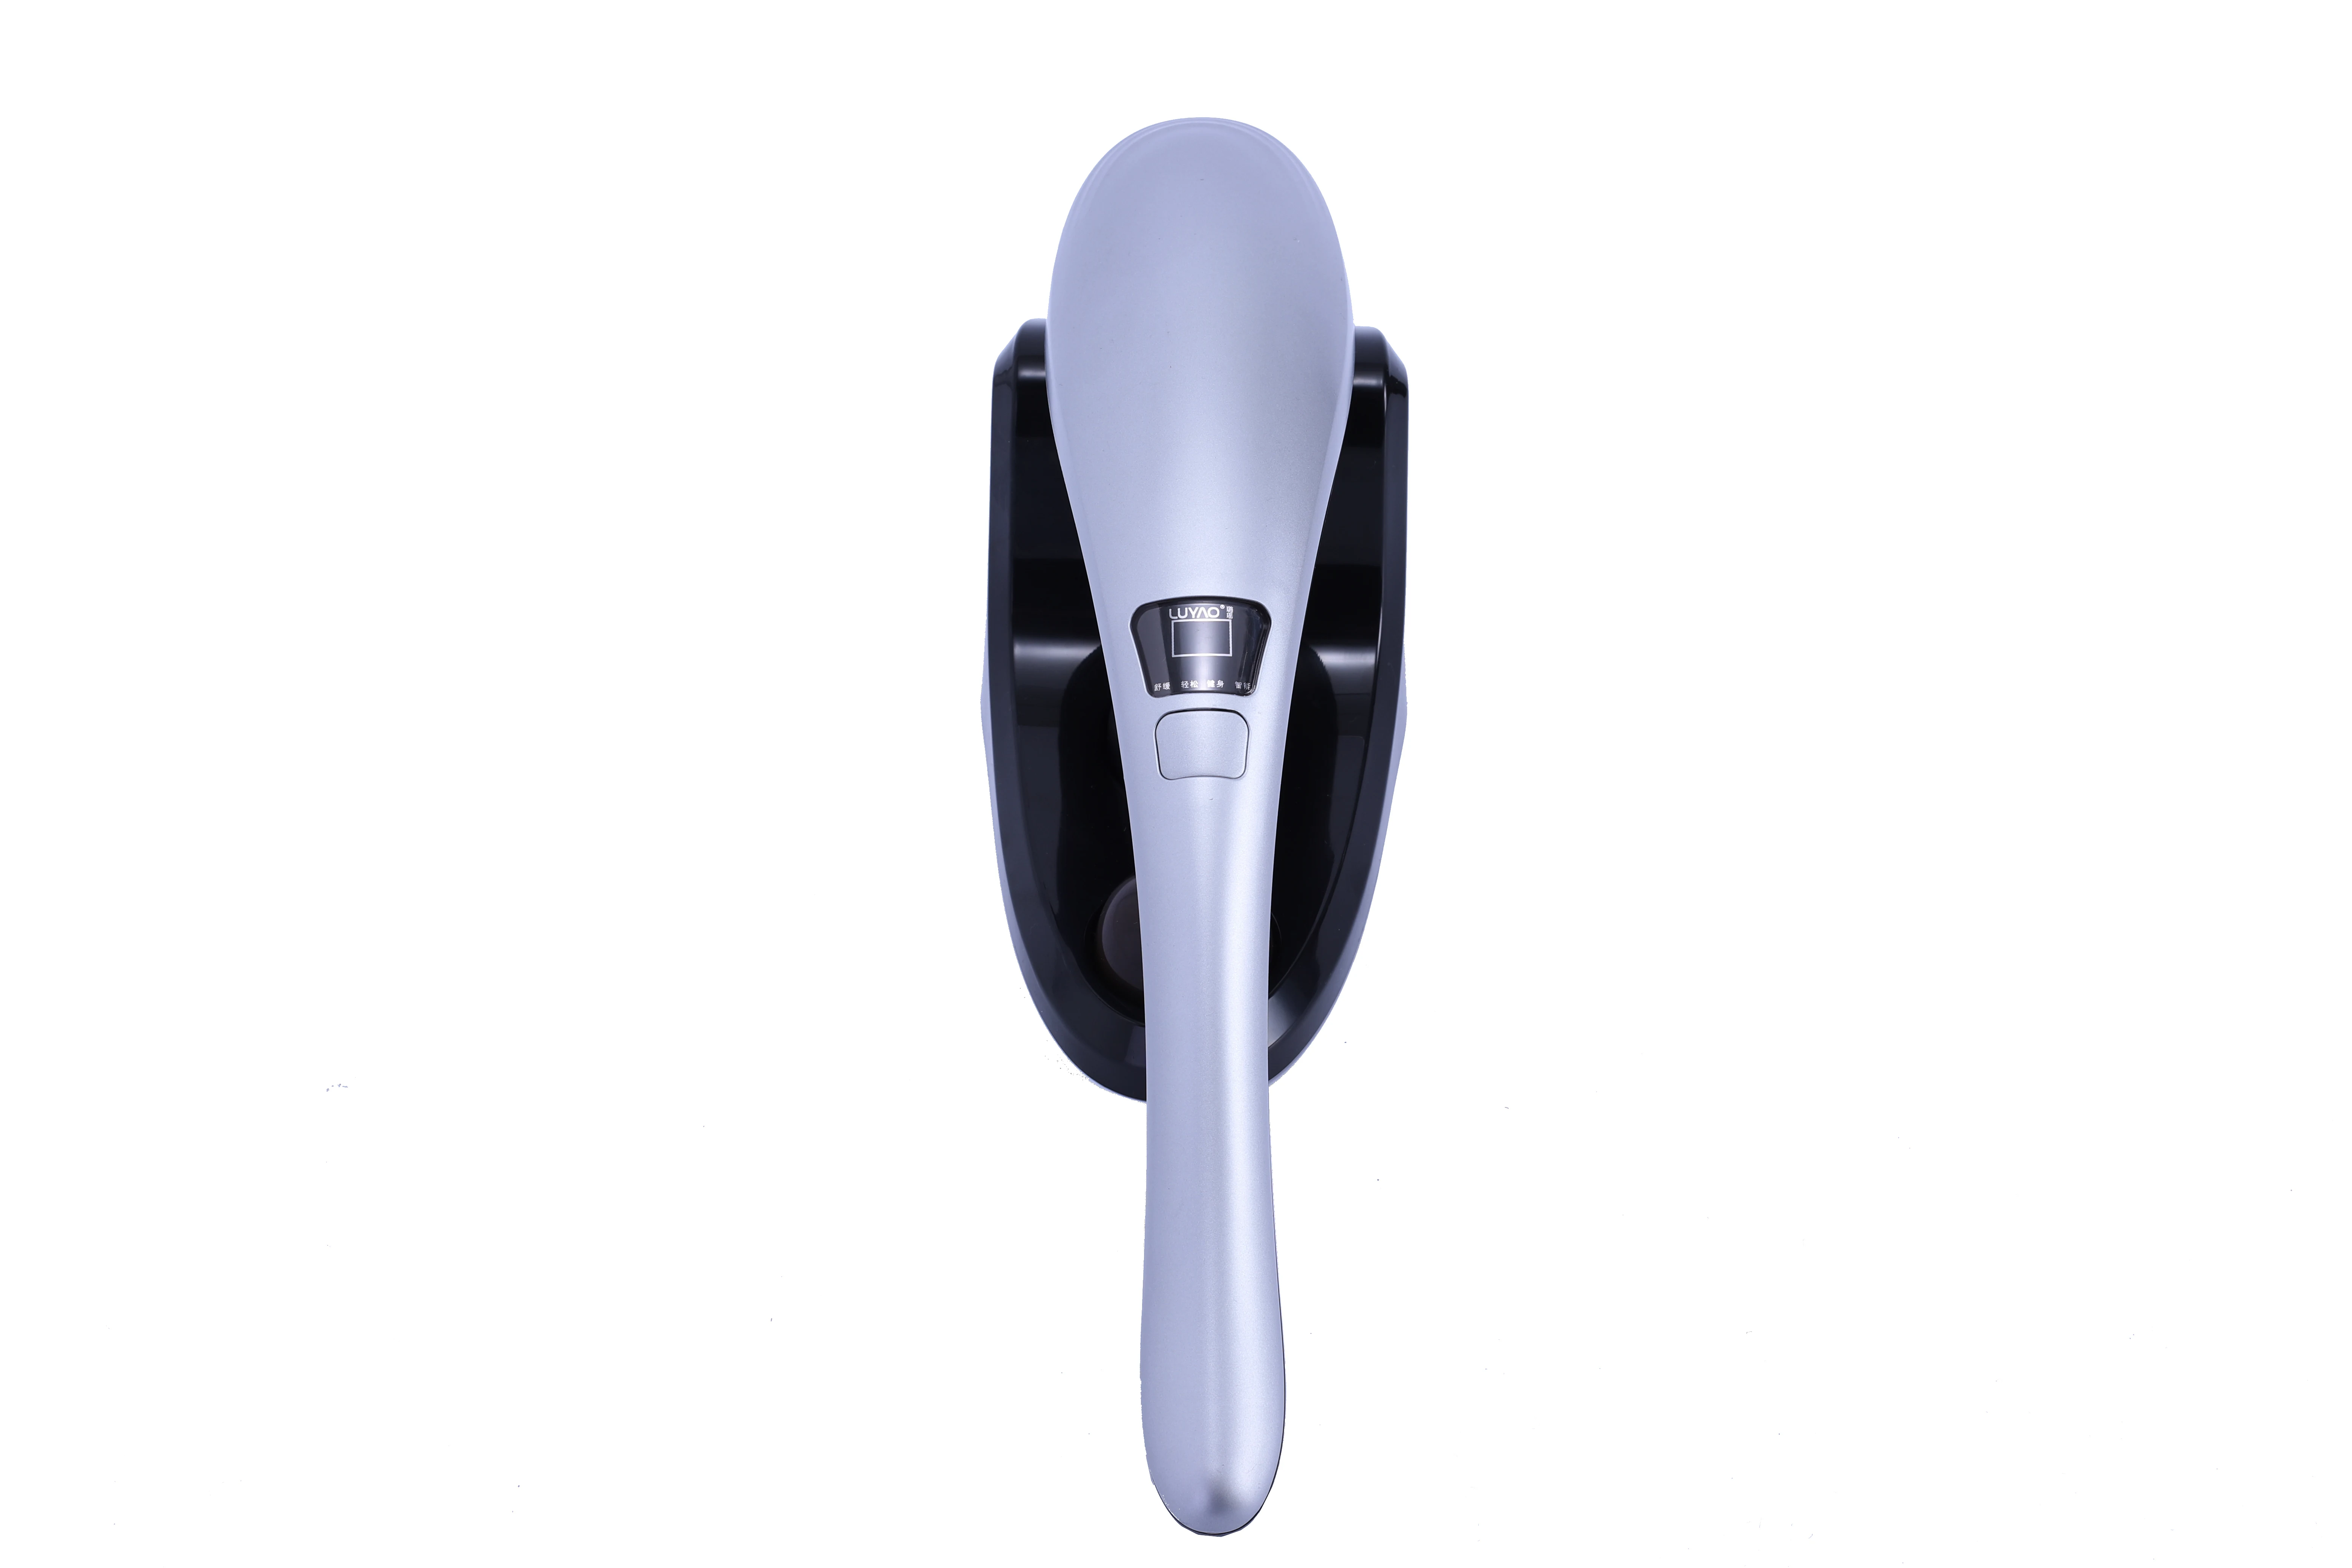 Super Quality Wireless Body Relax Rechargeable Handheld Vibration Massage Hammer